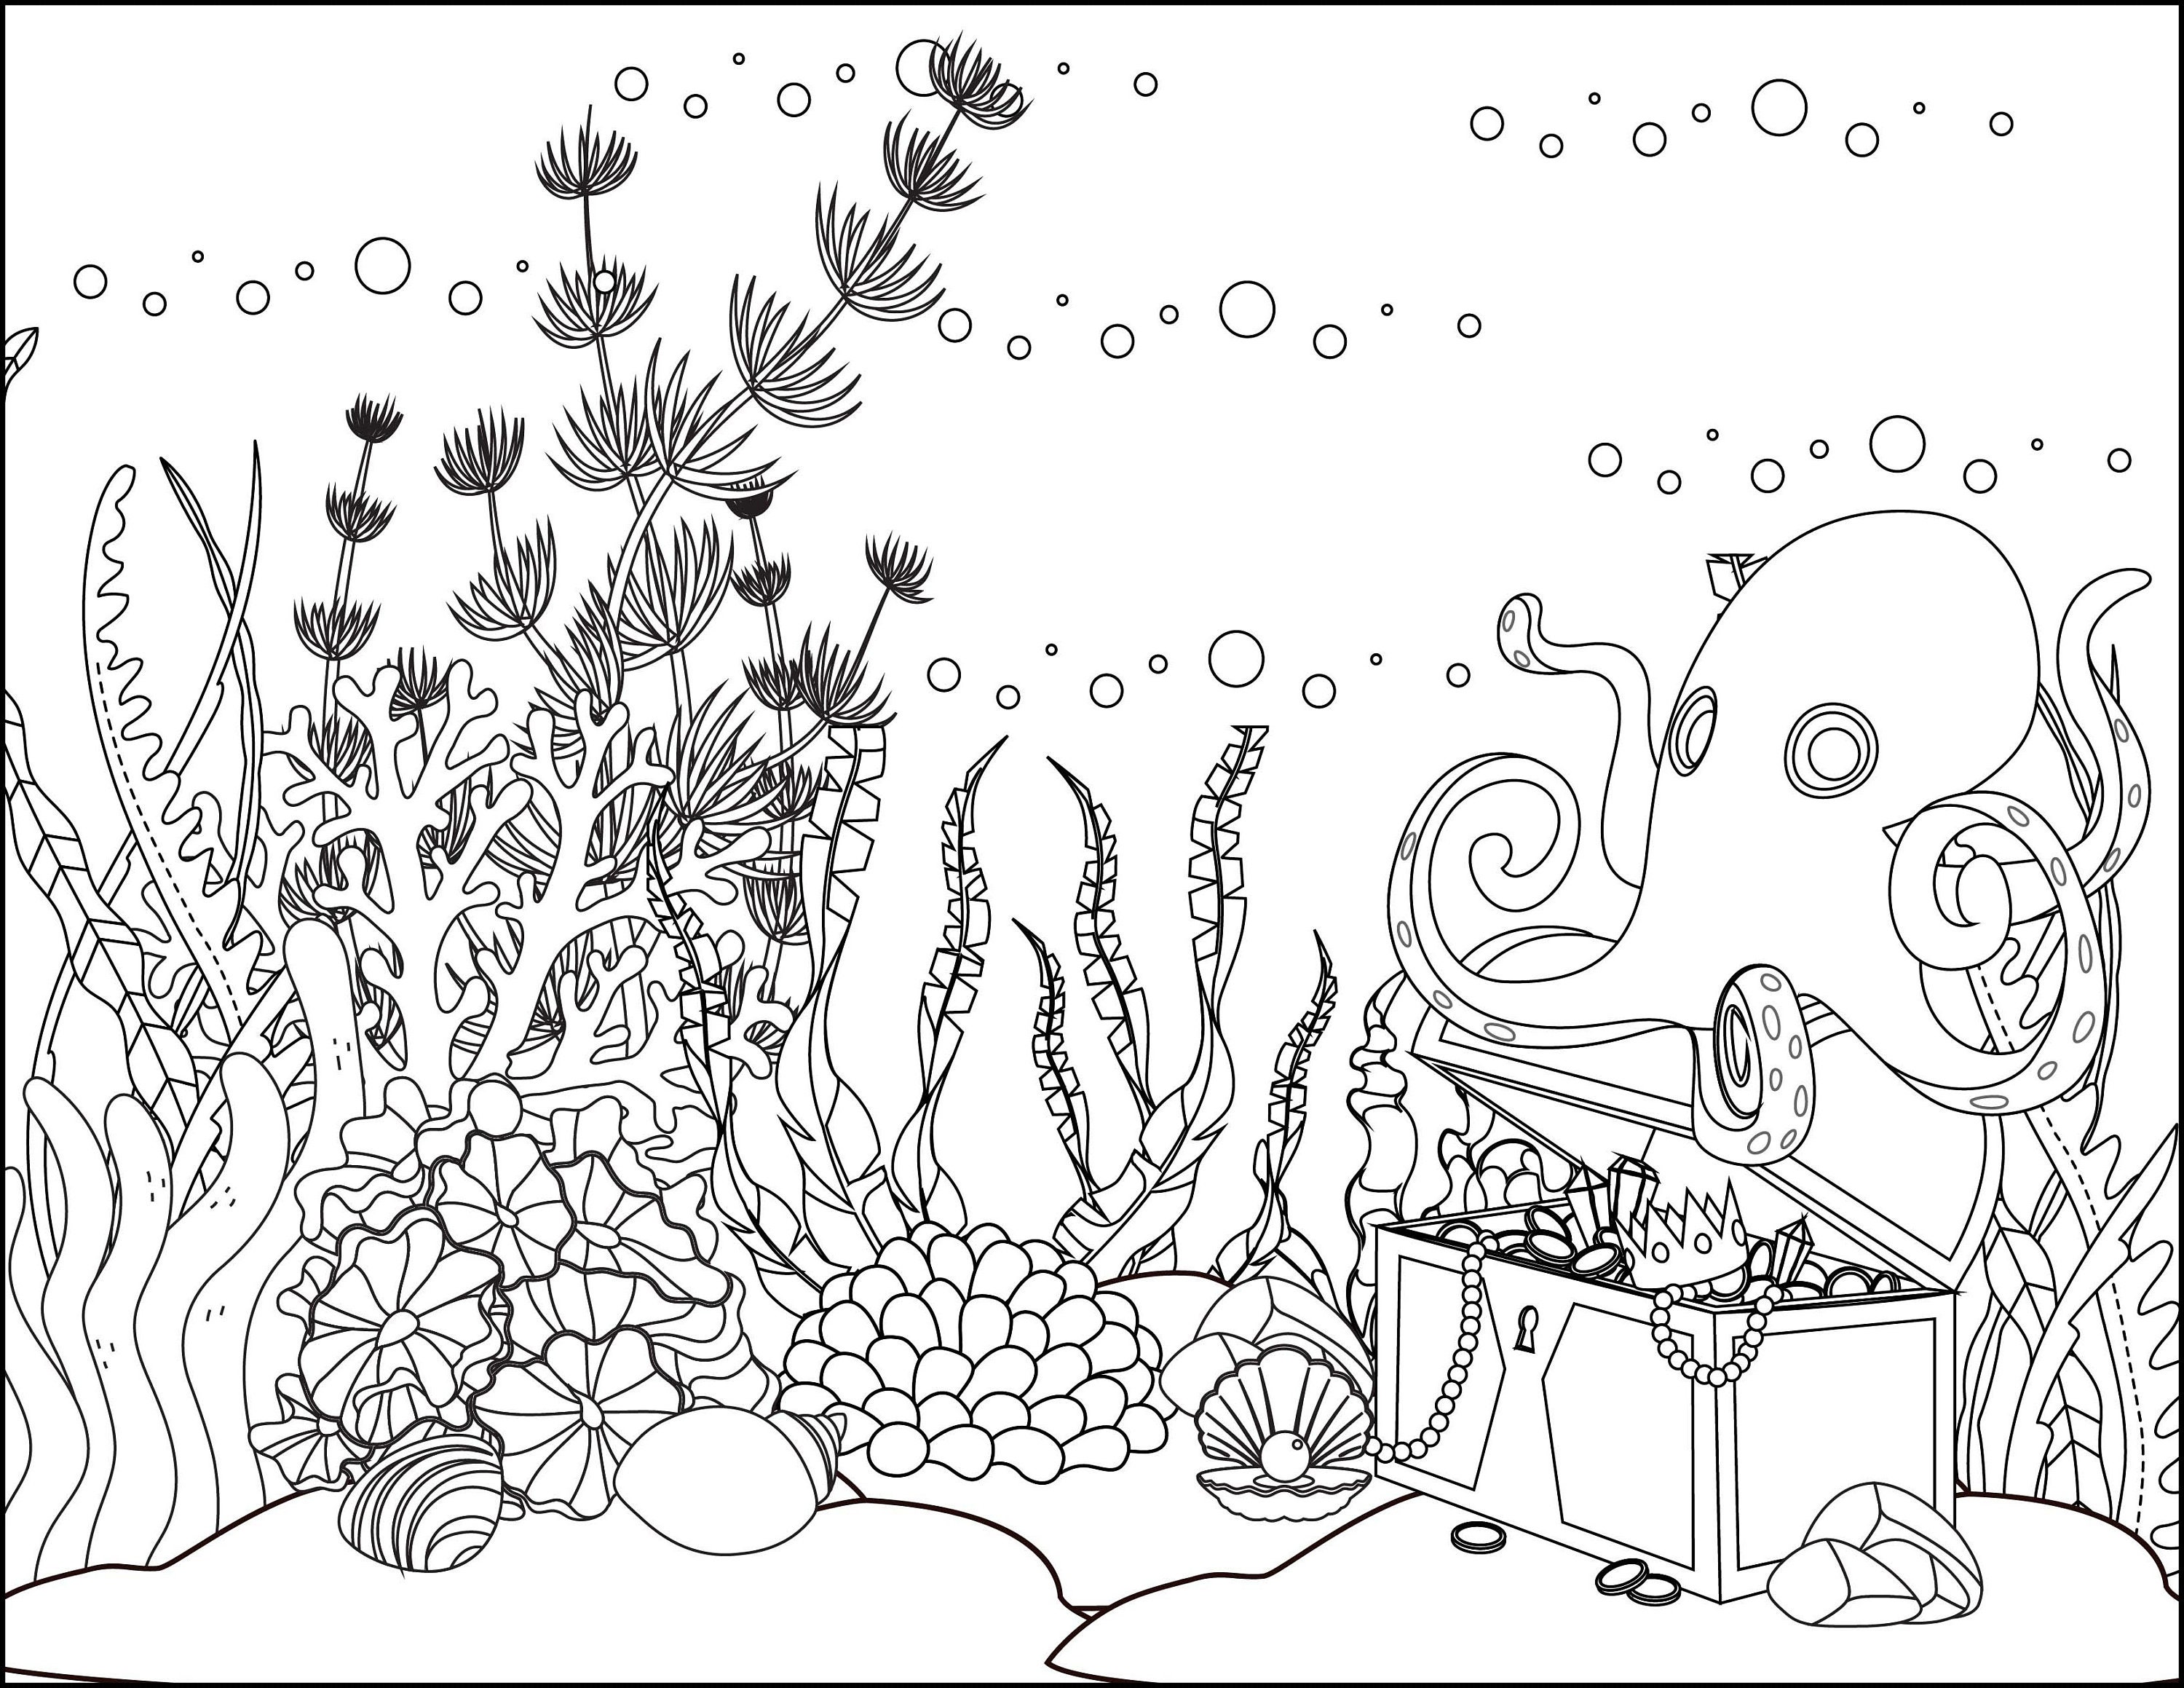 Ocean Themed Coloring Pages 10 | Etsy